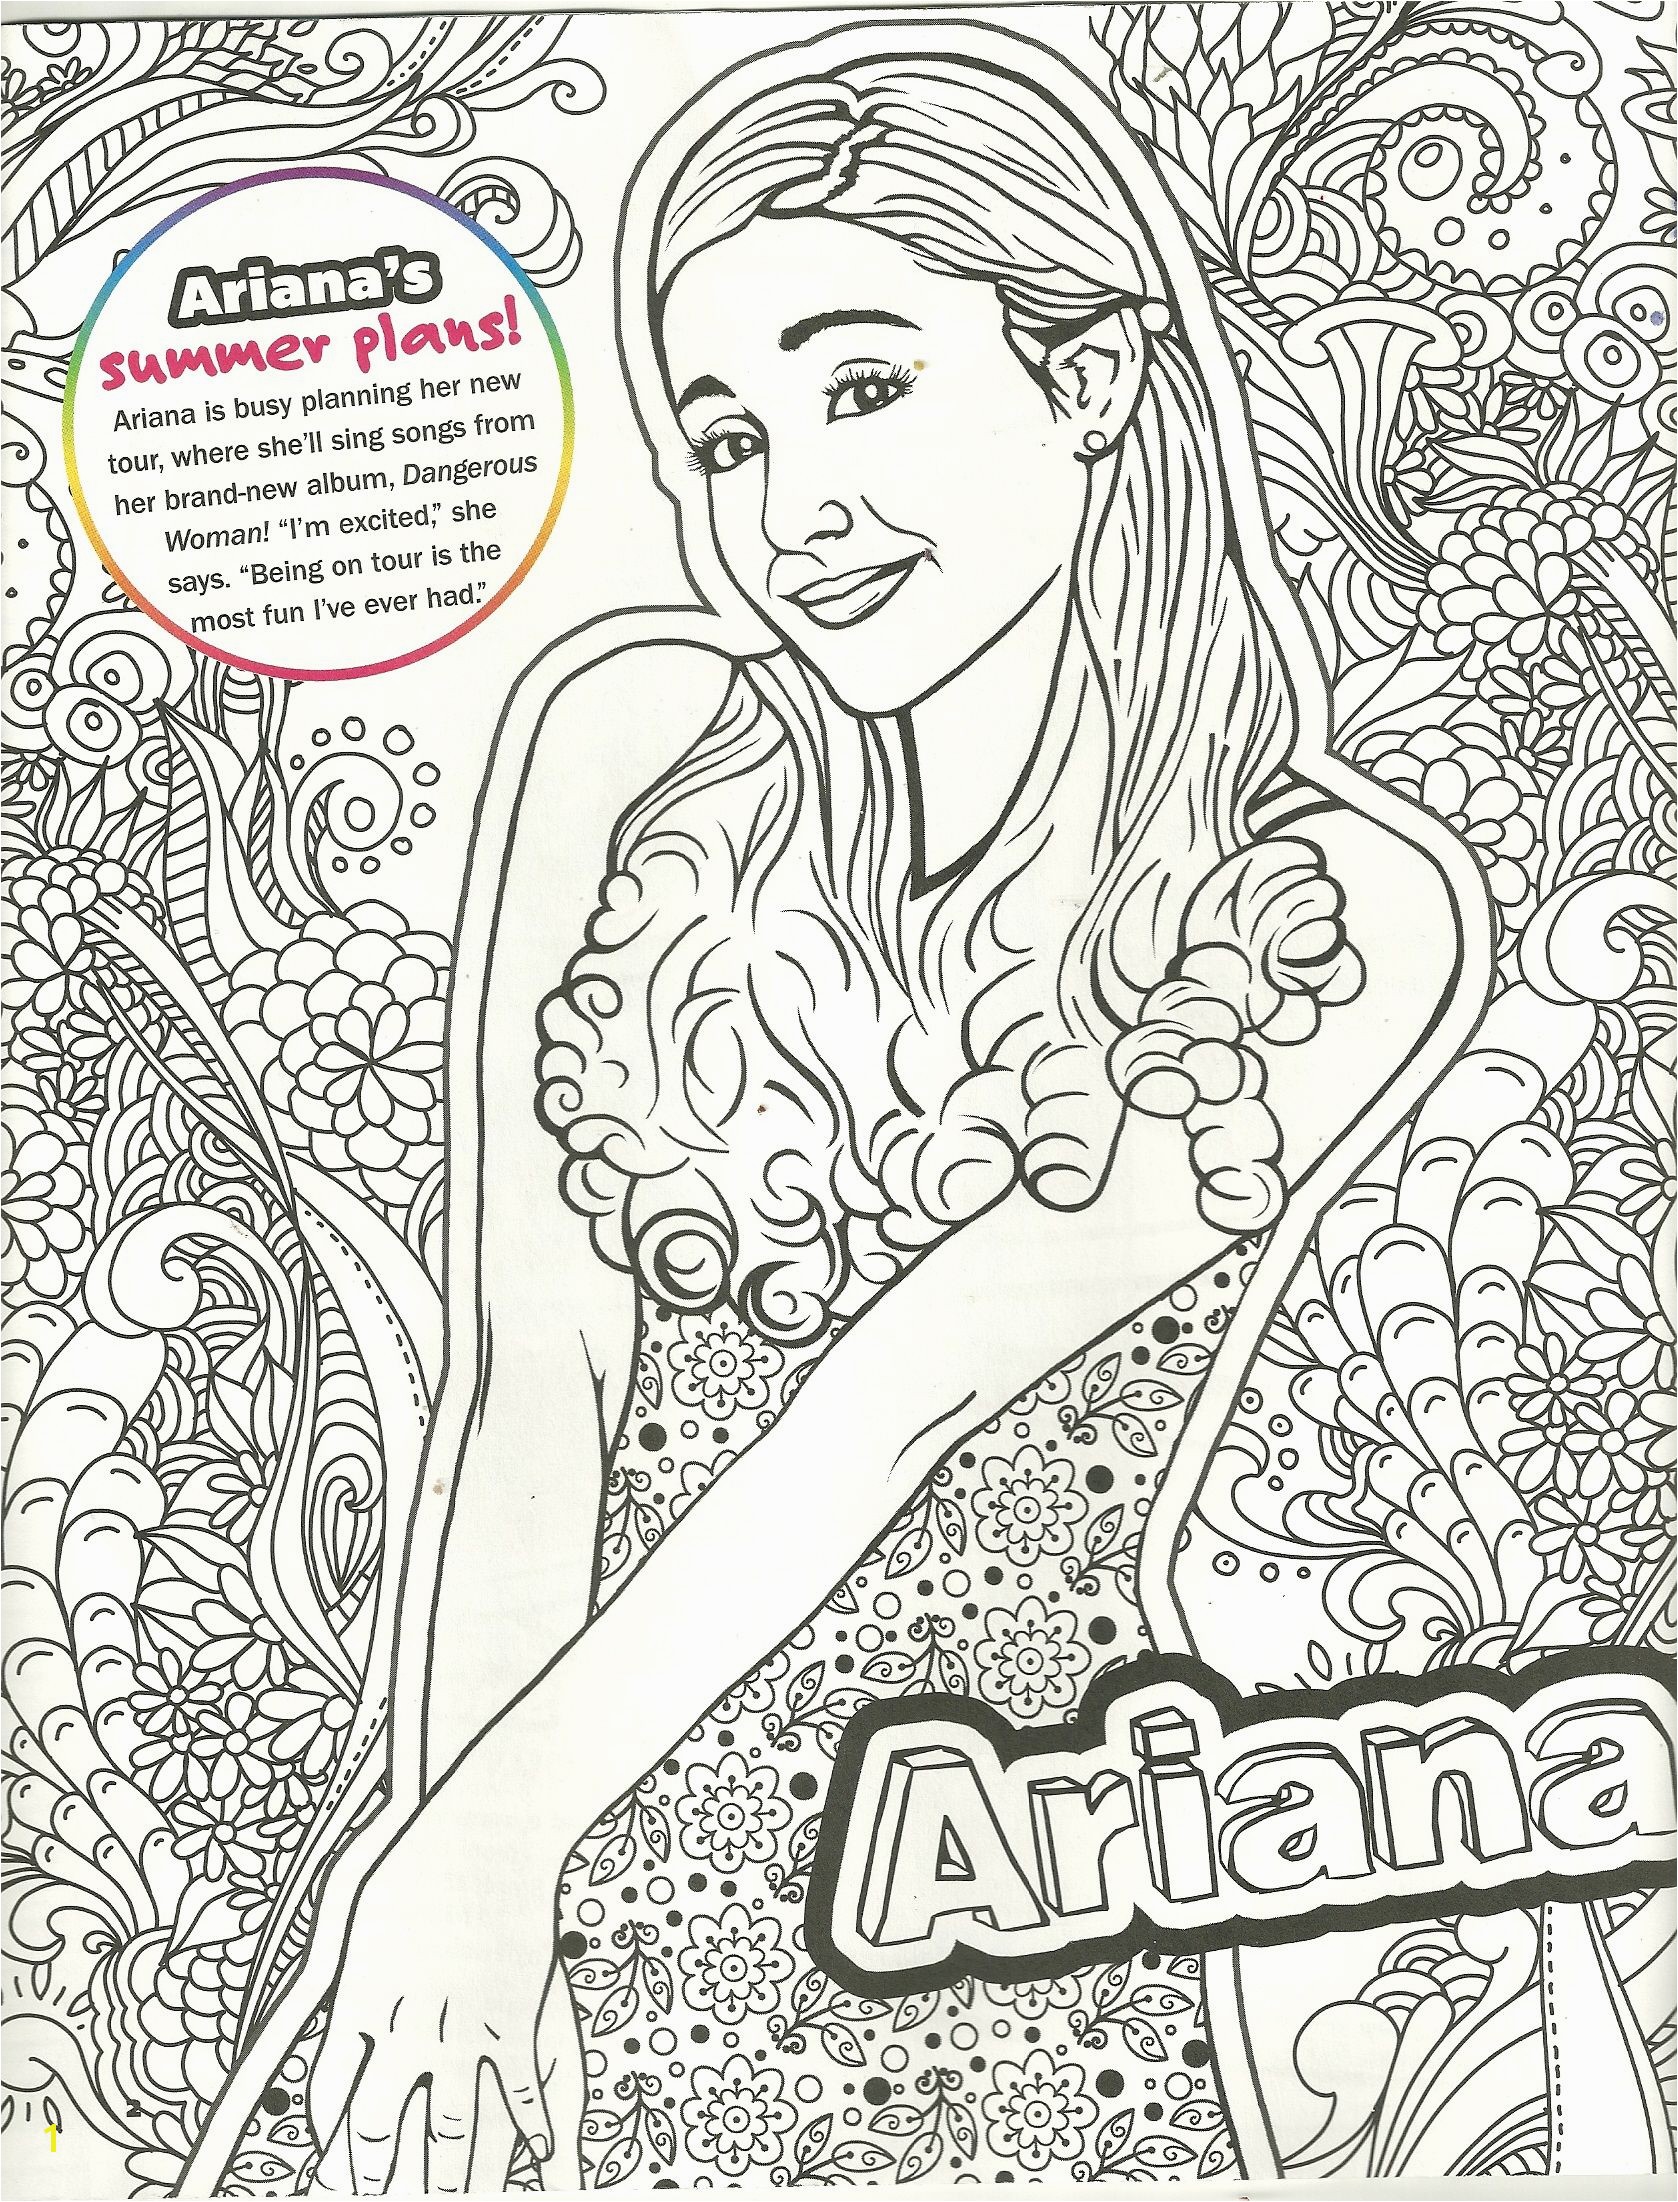 Coloring Pages Of Ariana Grande Ariana Grande Coloring Page My Coloring Pages In 2018